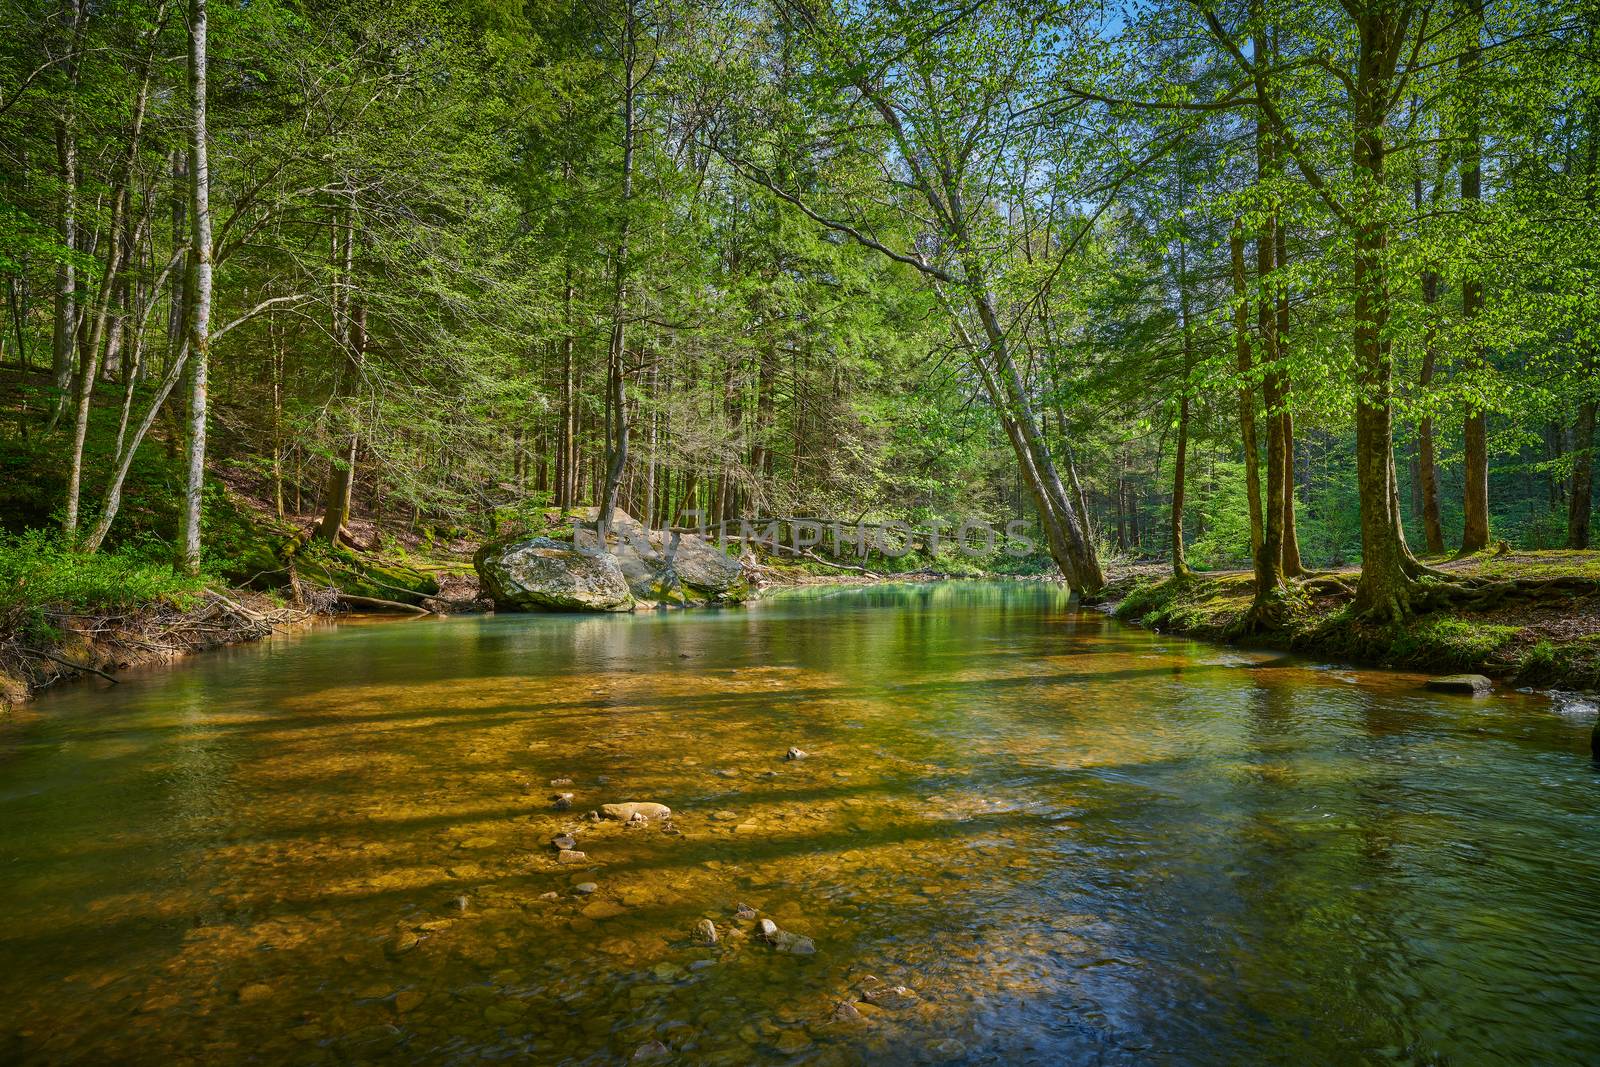 Flowing stream with trees and large boulder in Eastern Kentucky.